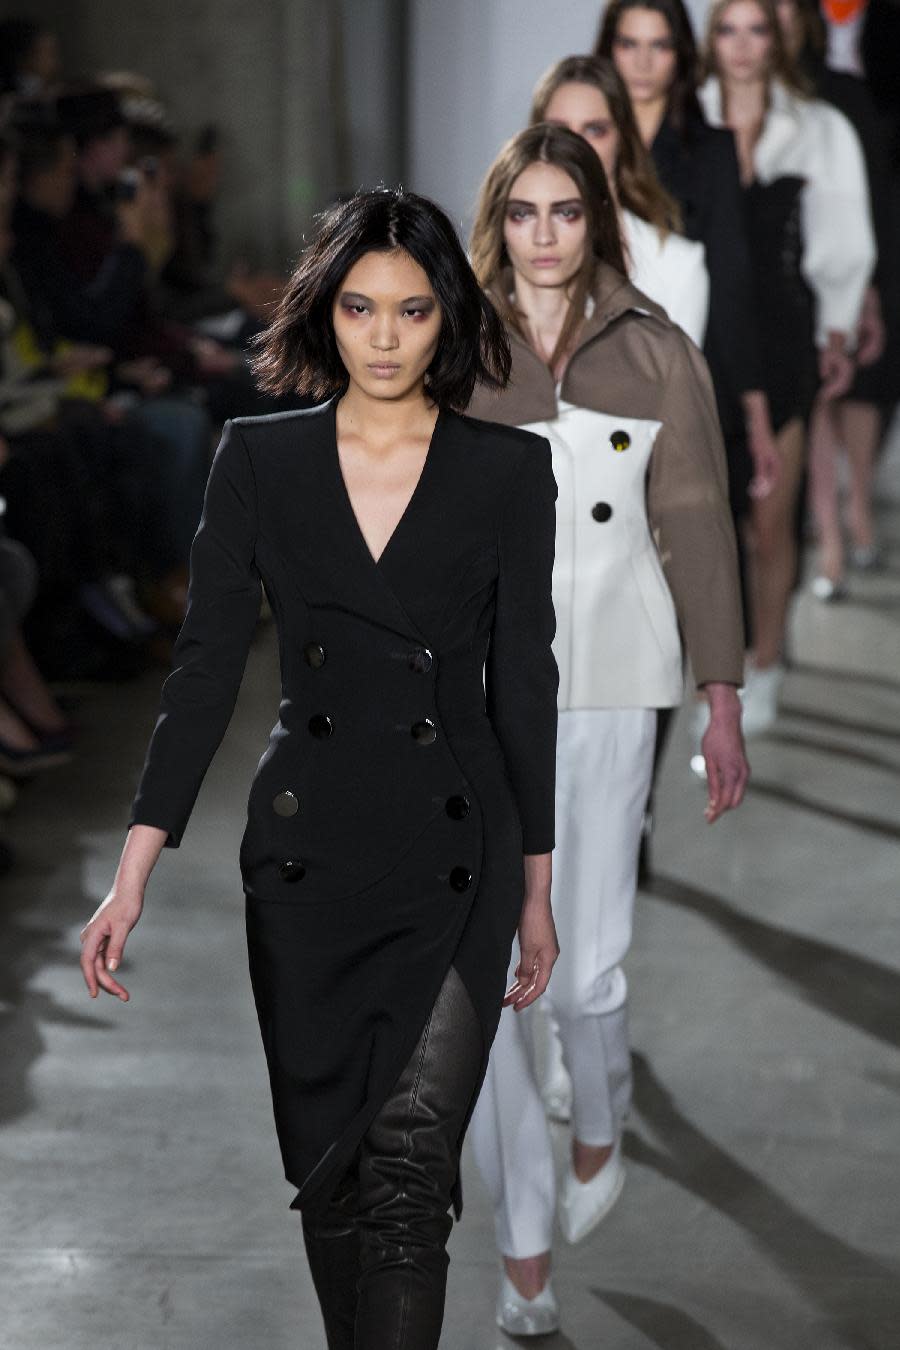 Models walk the runway at the presentation of the Altuzarra Fall 2013 fashion collection during Fashion Week, Saturday, Feb. 9, 2013, in New York. (AP Photo/Craig Ruttle)